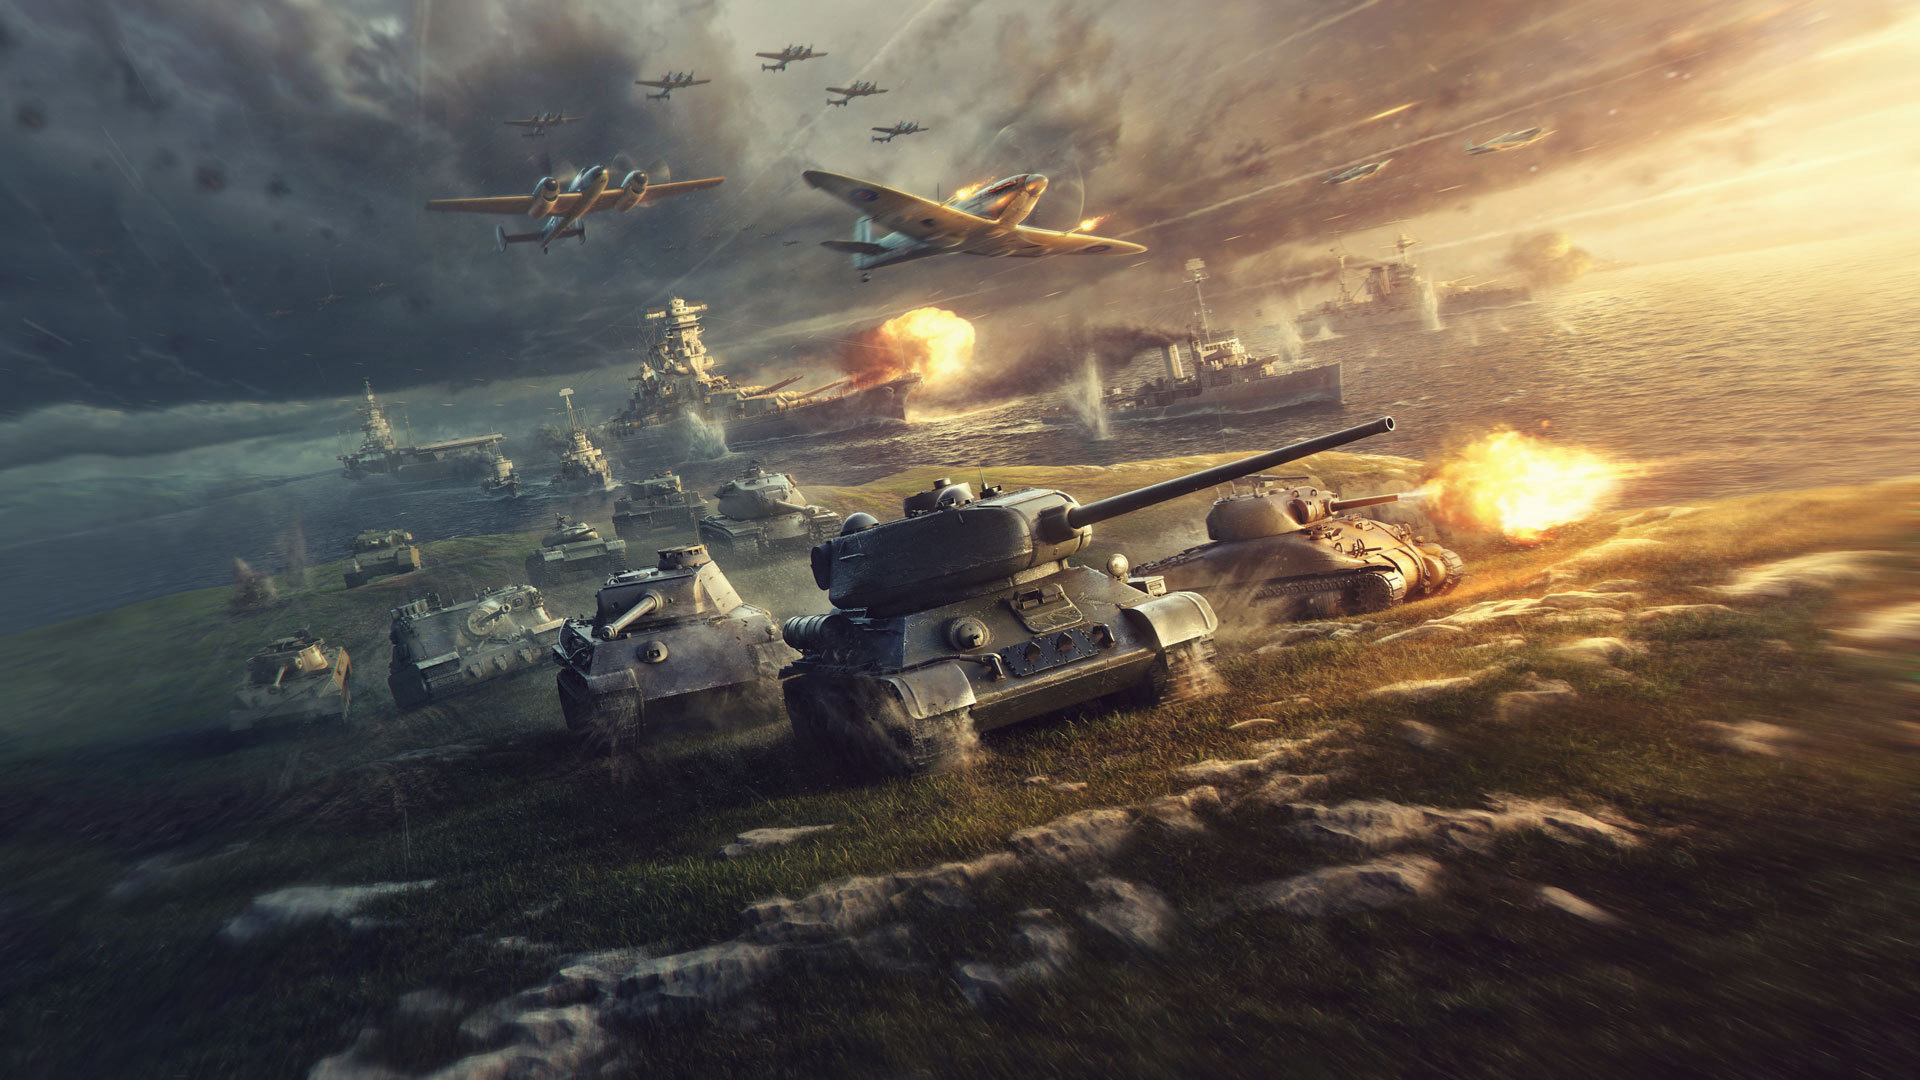 How to Choose Teams and Players for World of Tanks Betting: Tips and Recommendations